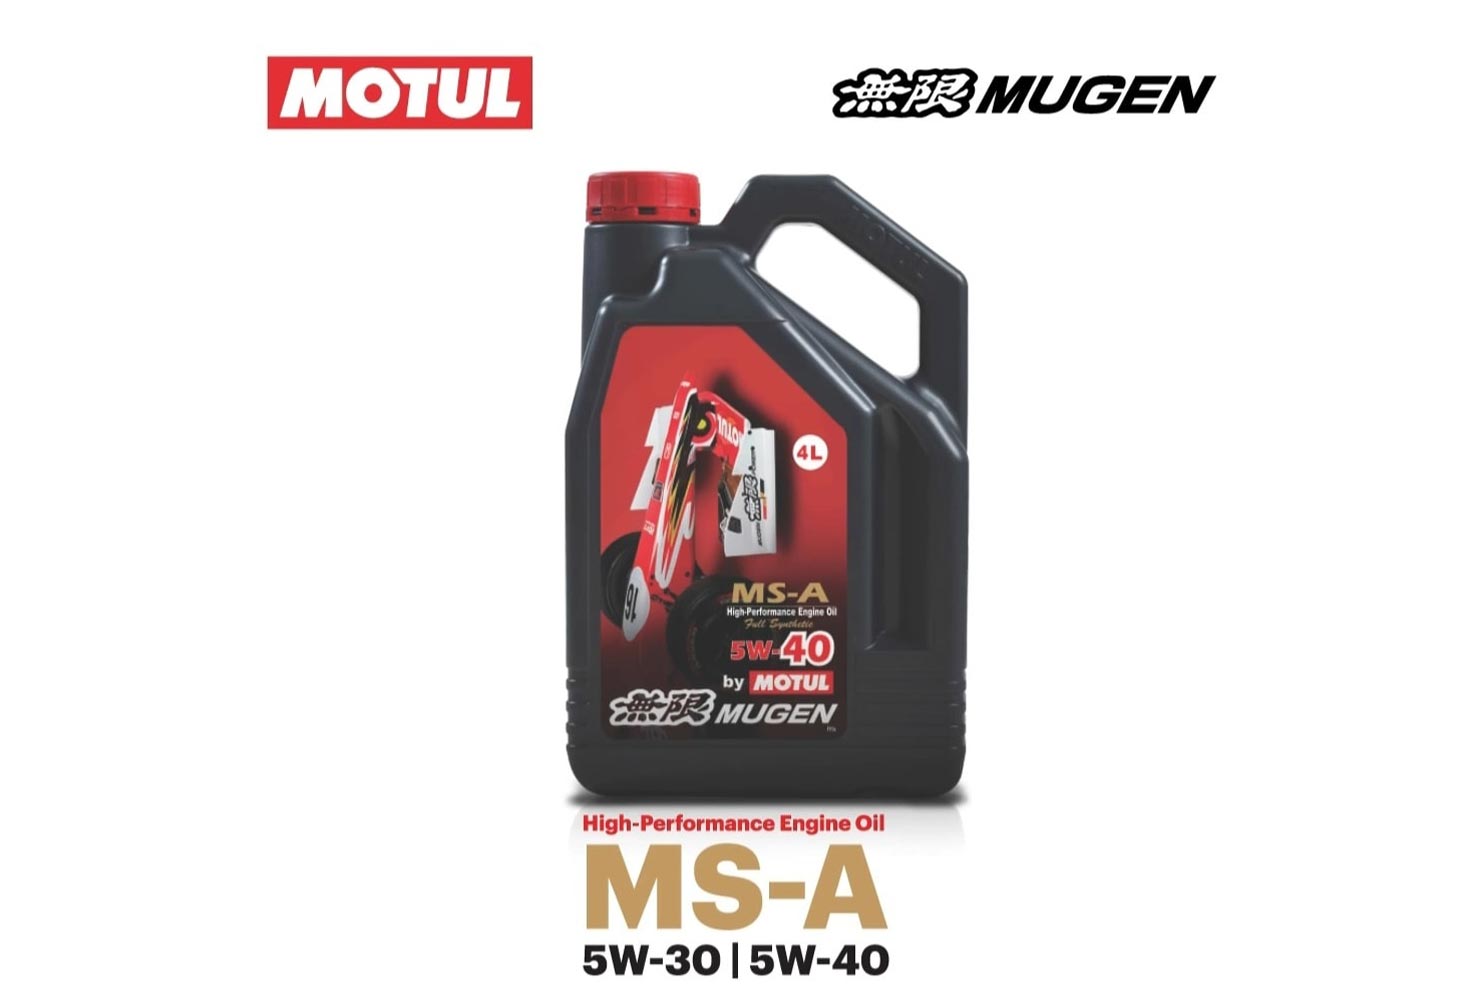 Motul Asia-Pacific announces launch of new synthetic lubricant